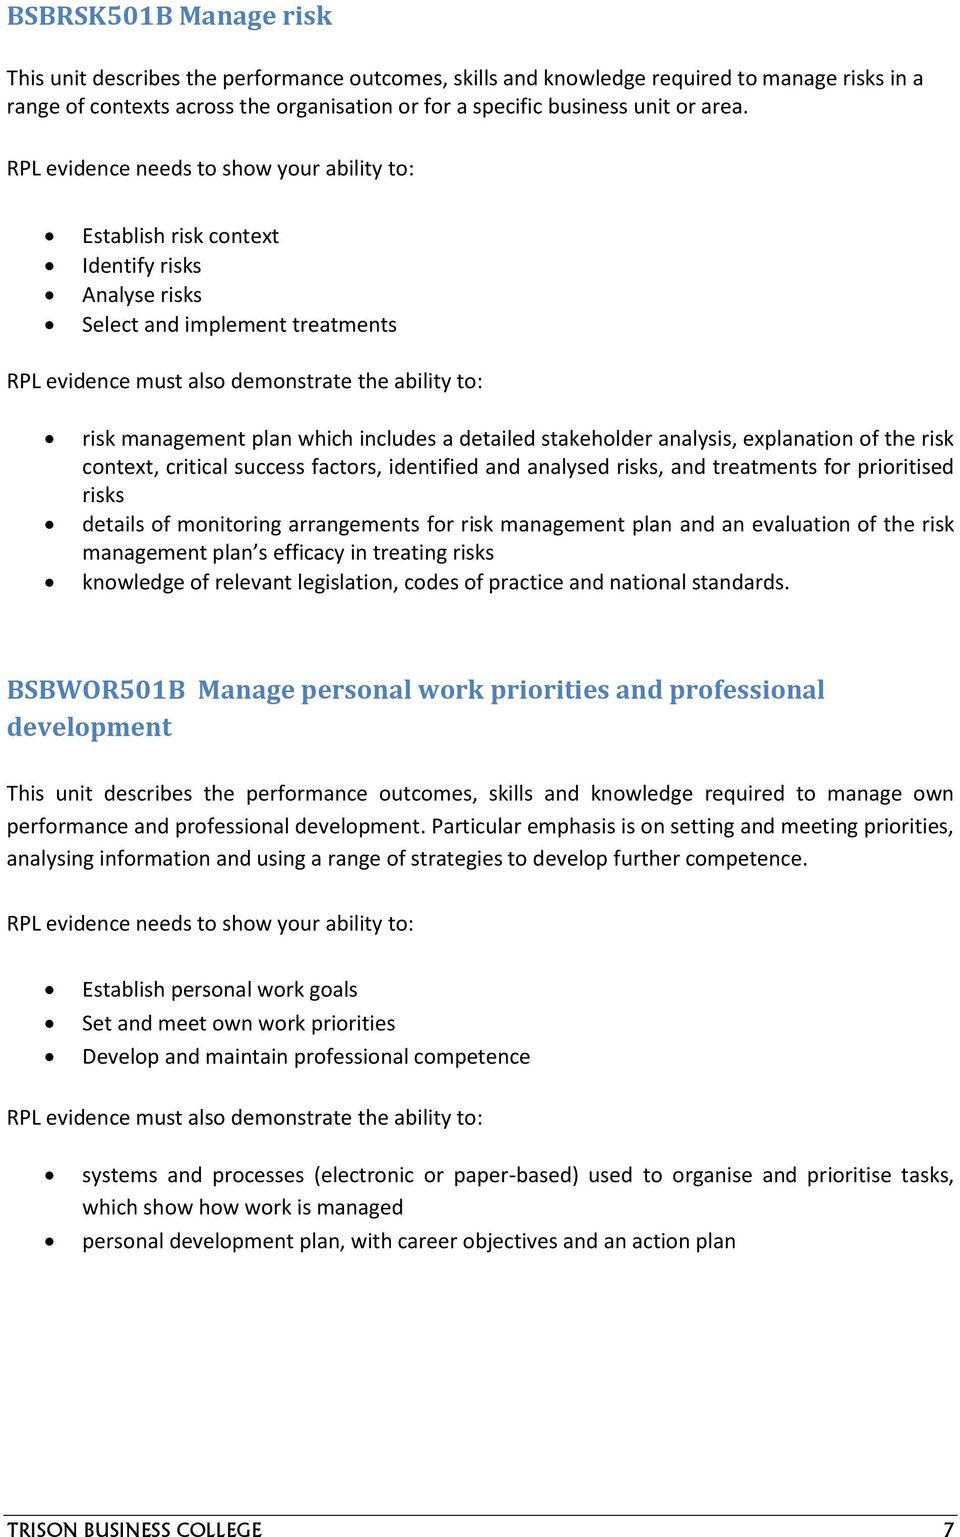 critical success factors, identified and analysed risks, and treatments for prioritised risks details of monitoring arrangements for risk management plan and an evaluation of the risk management plan